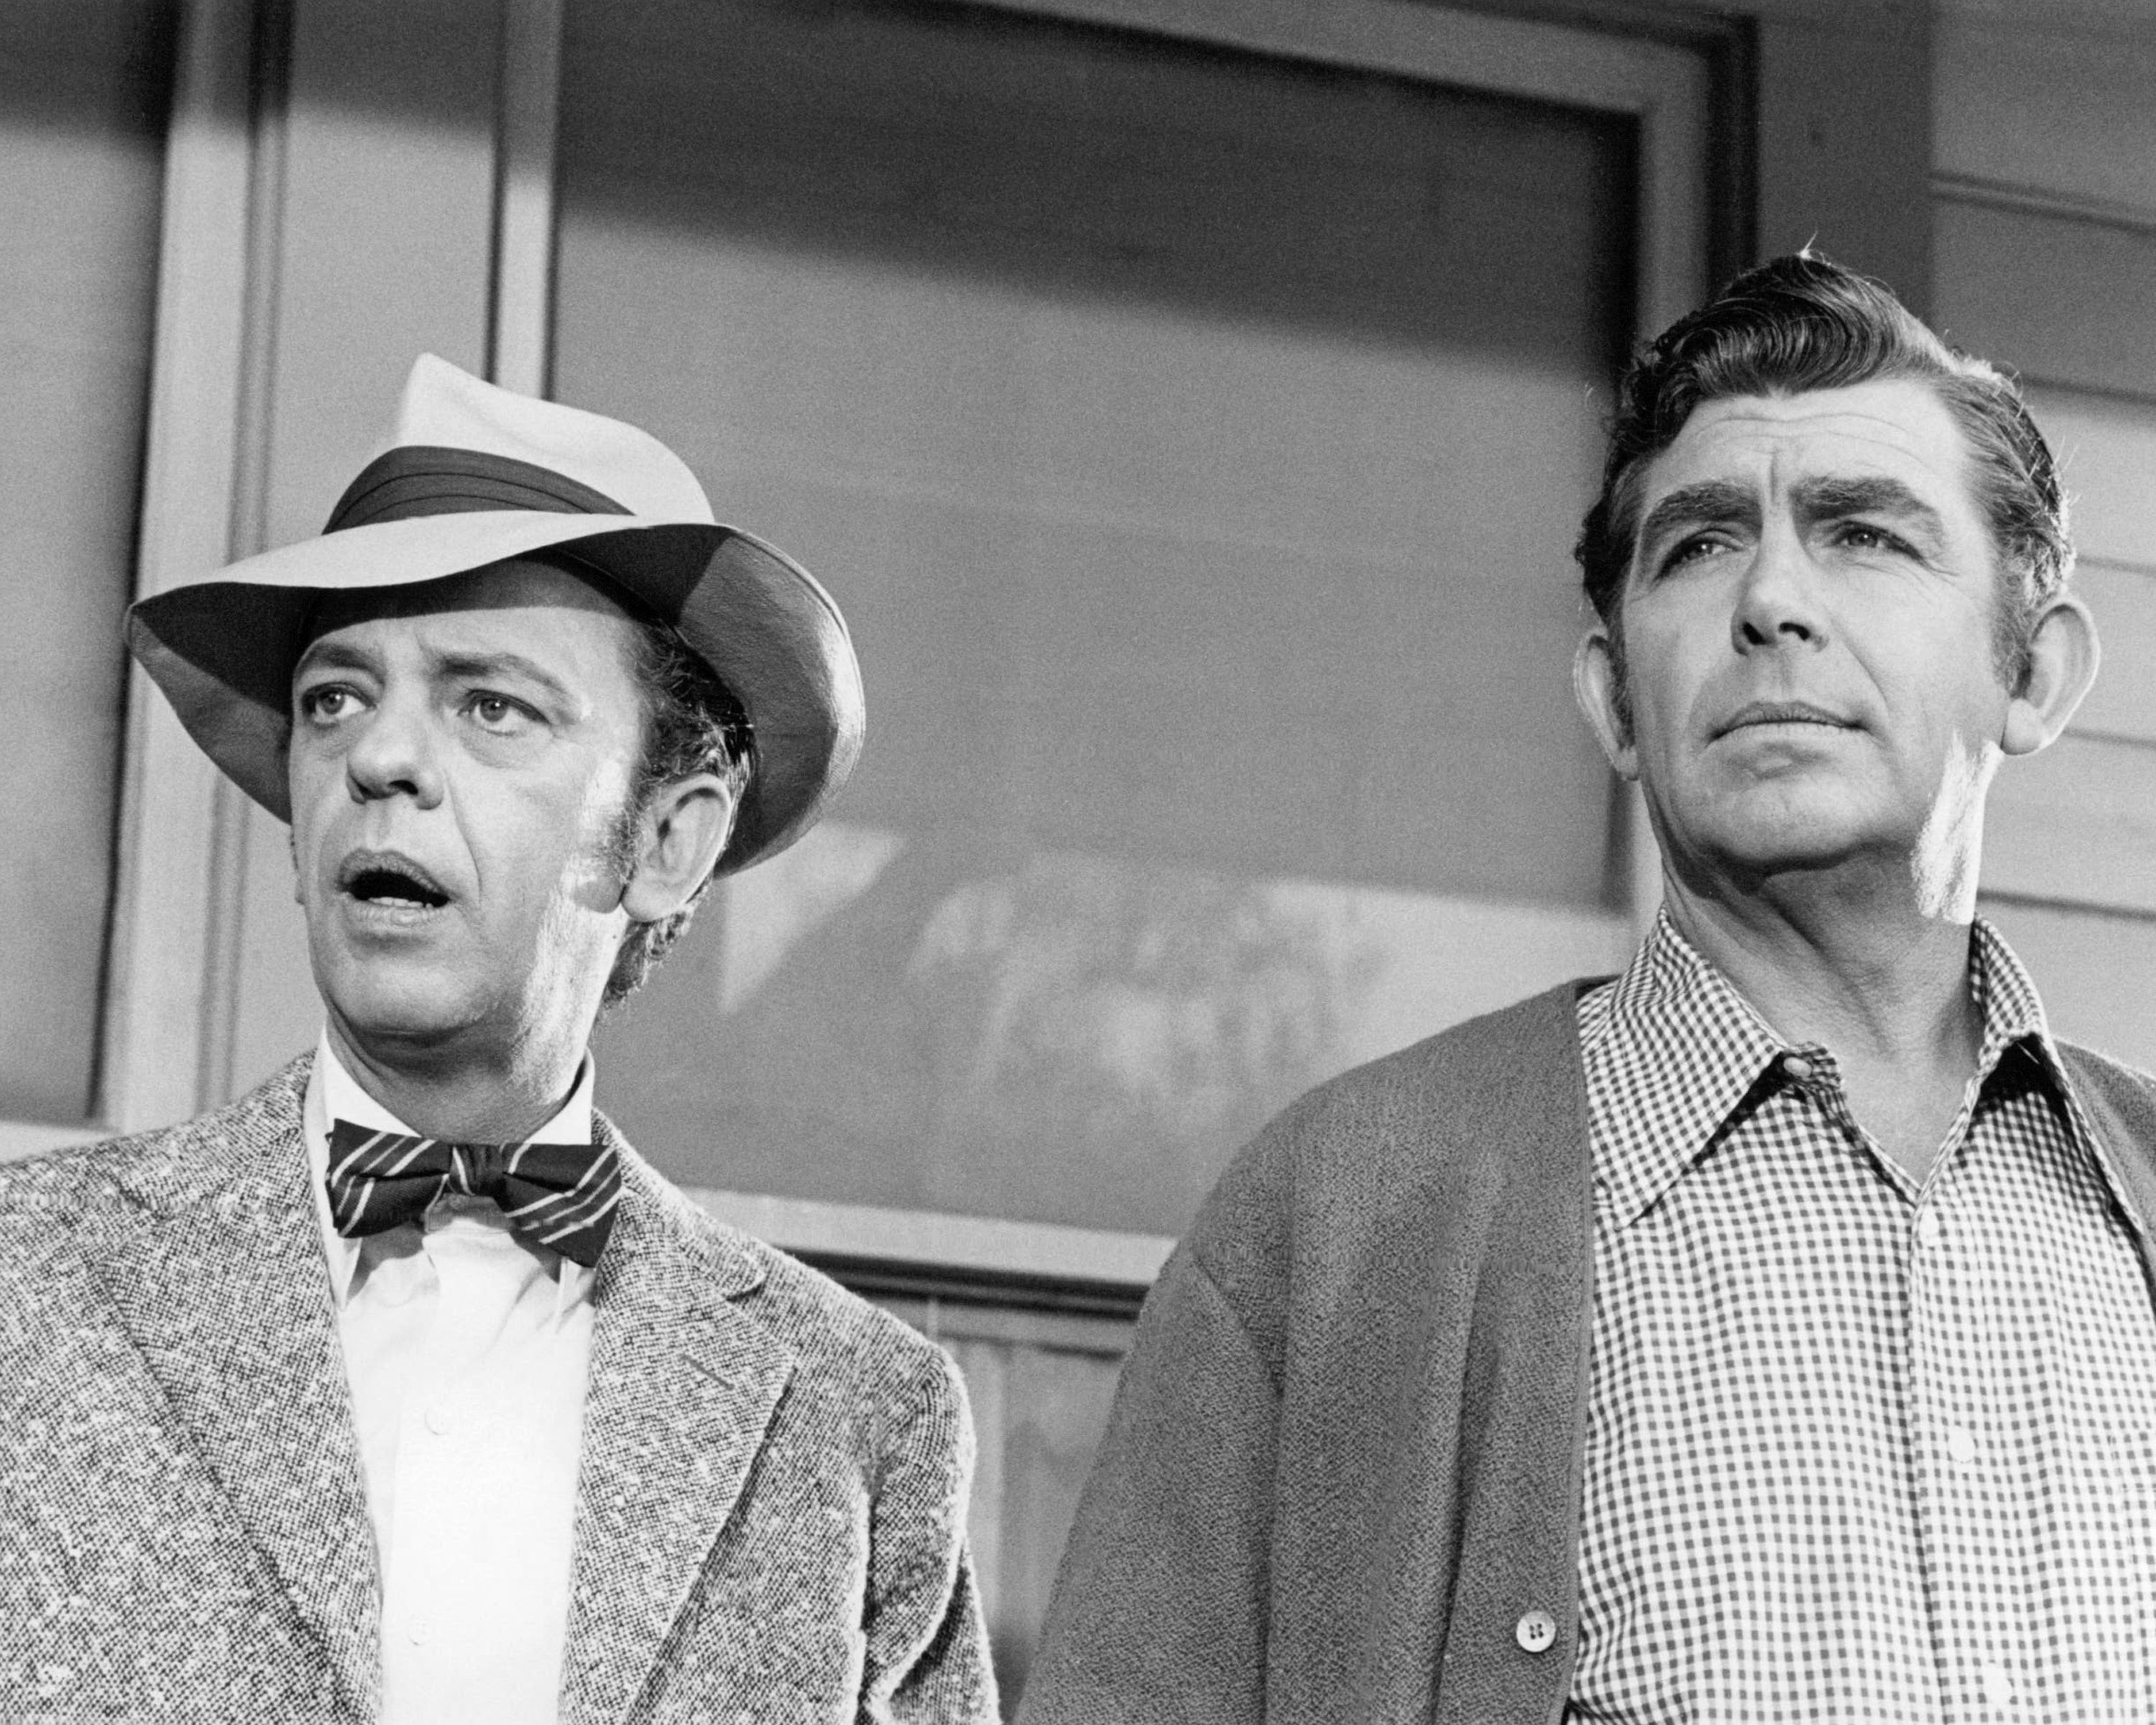 American actors Don Knotts, as Barney Fife, and Andy Griffith (1926 - 2012), as Sheriff Andy Taylor in the US sitcom 'The Andy Griffith Show', circa 1965. | Source: Getty Images